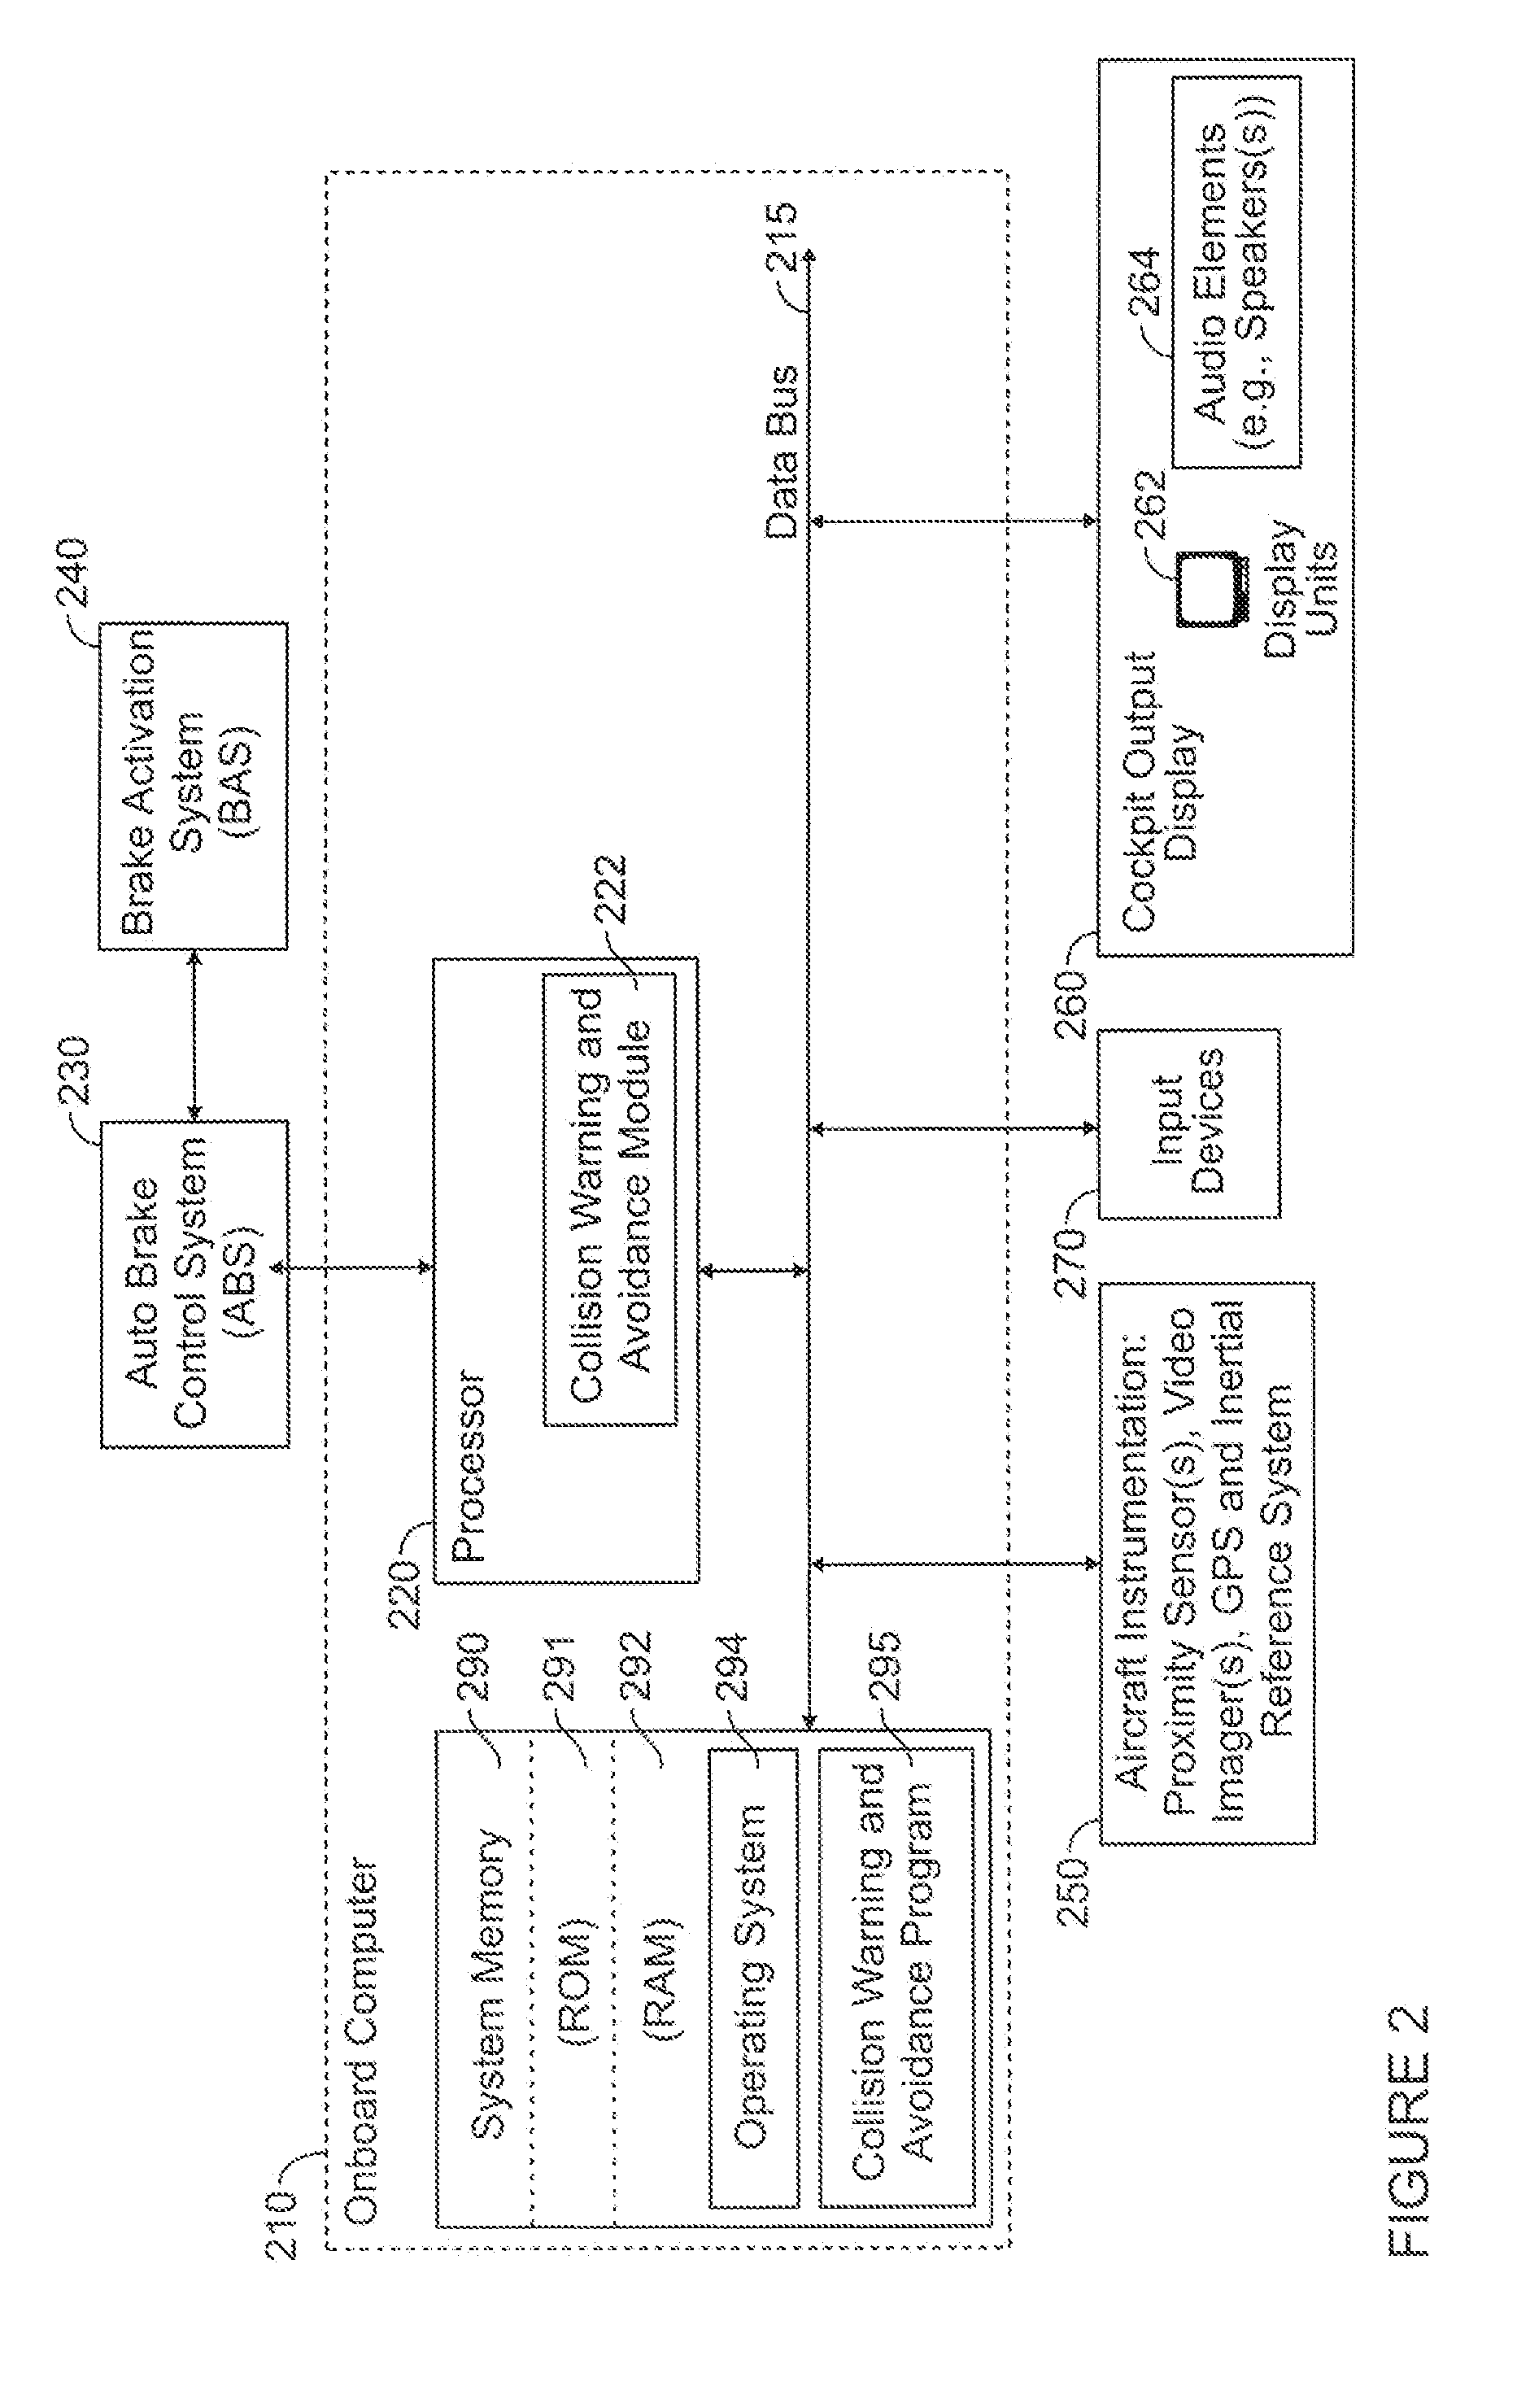 Methods and systems for avoiding a collision between an aircraft on a ground surface and an obstacle